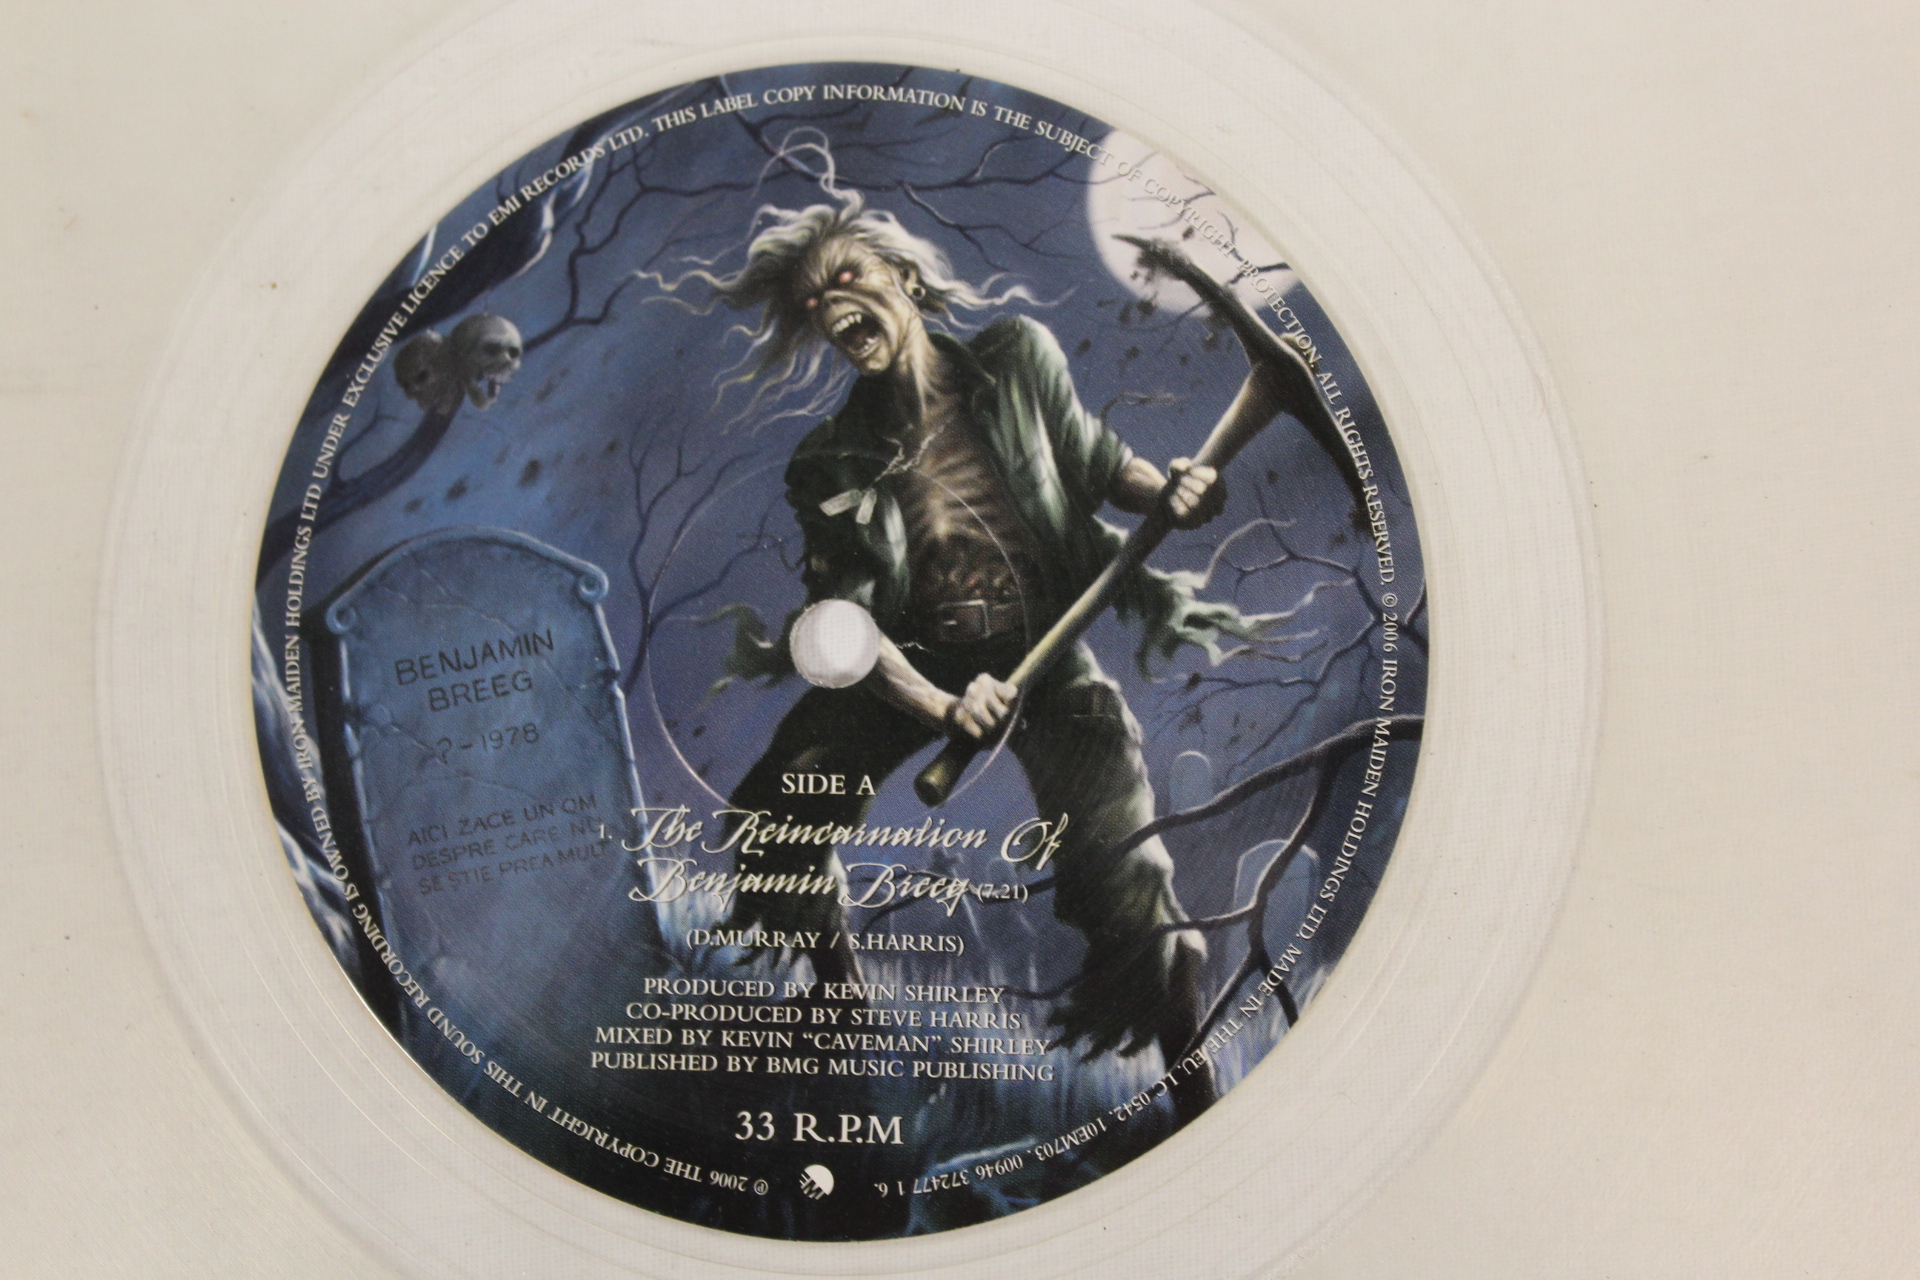 NWOBHM 12" singles and LPs to include Def Leppard, 2 x Kick Axe and Metallica 'One' in gatefold - Image 5 of 7